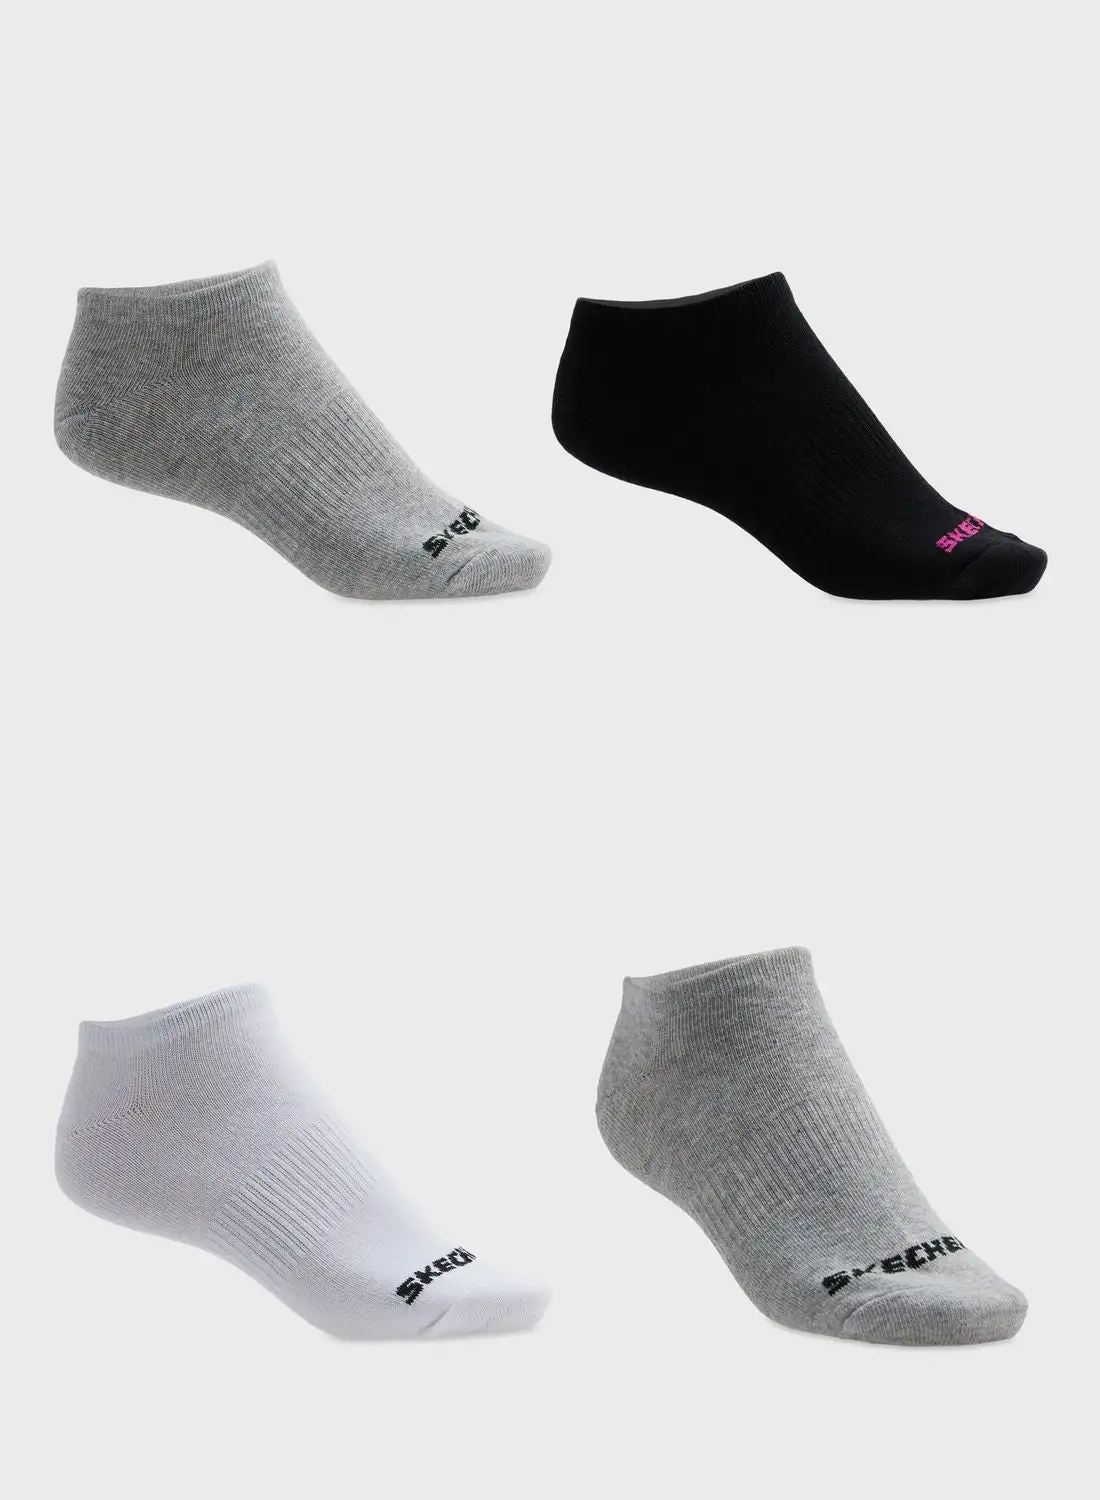 SKECHERS 3 Pack Non Terry No Show Socks